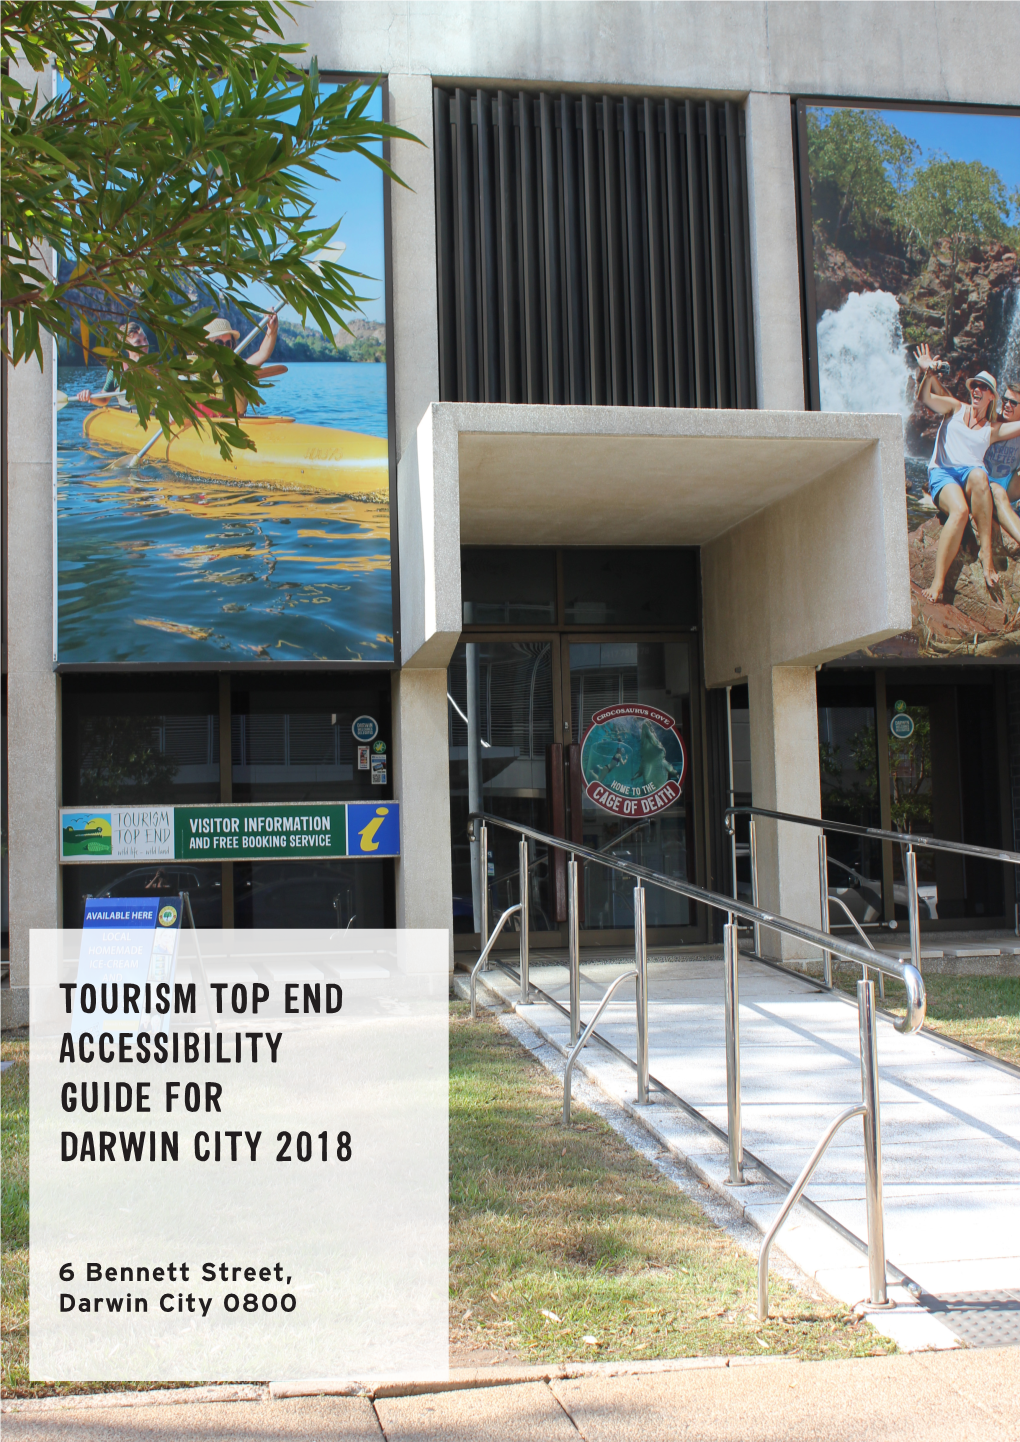 Tourism Top End Accessibility Guide for Darwin City 2018